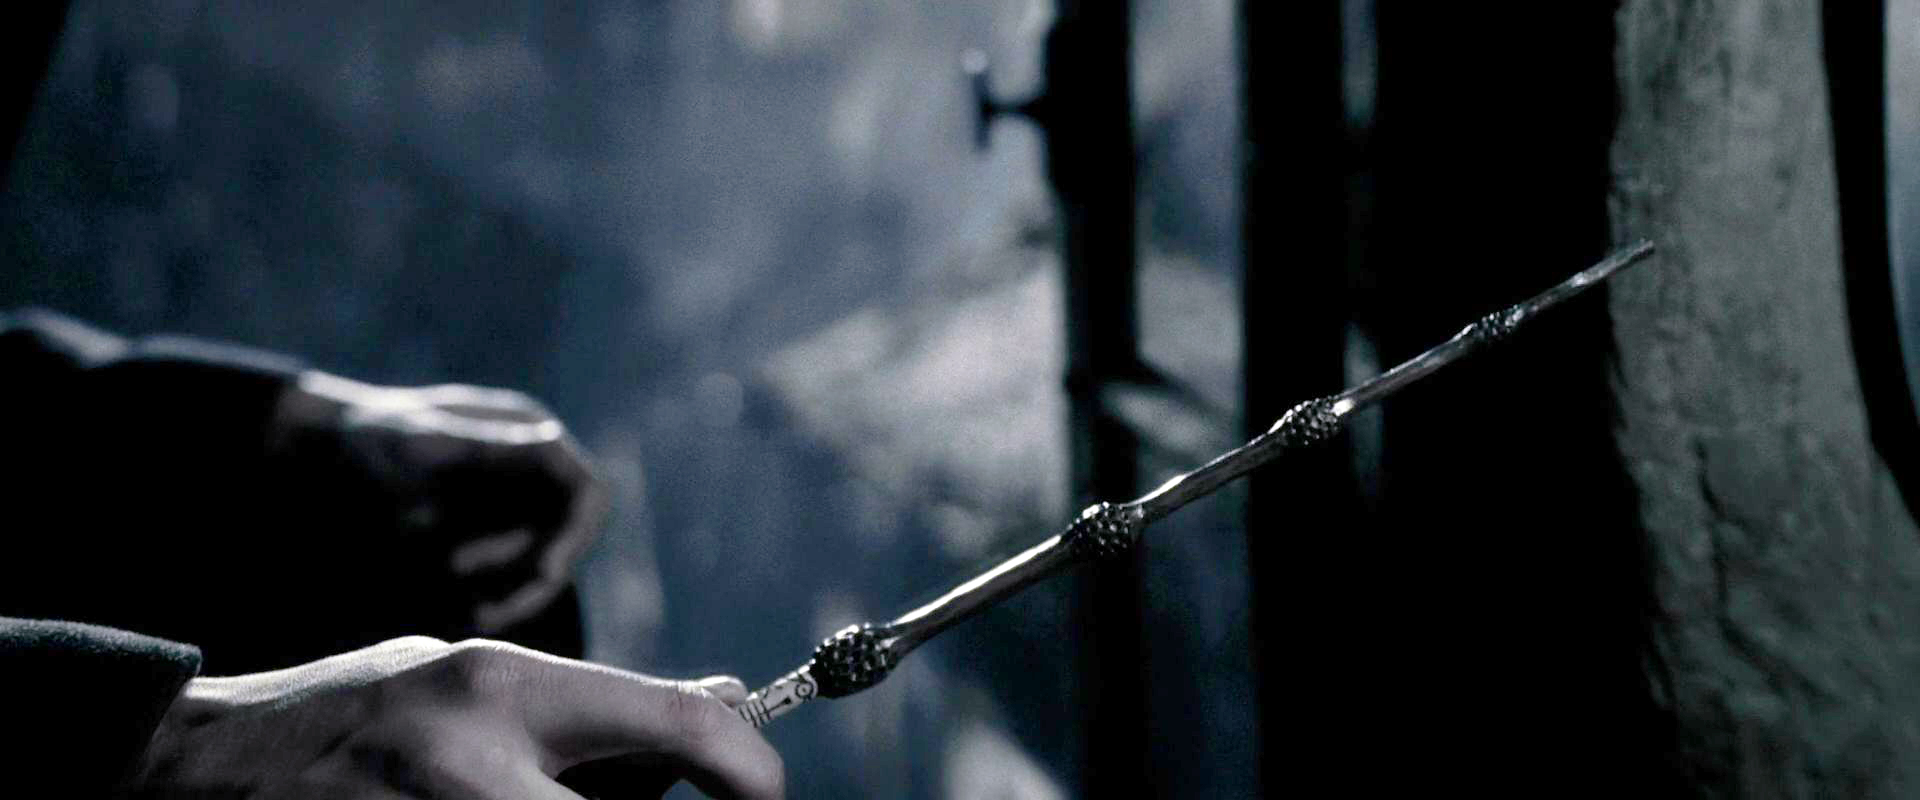 The Crimes of Grindelwald The Elder Wand